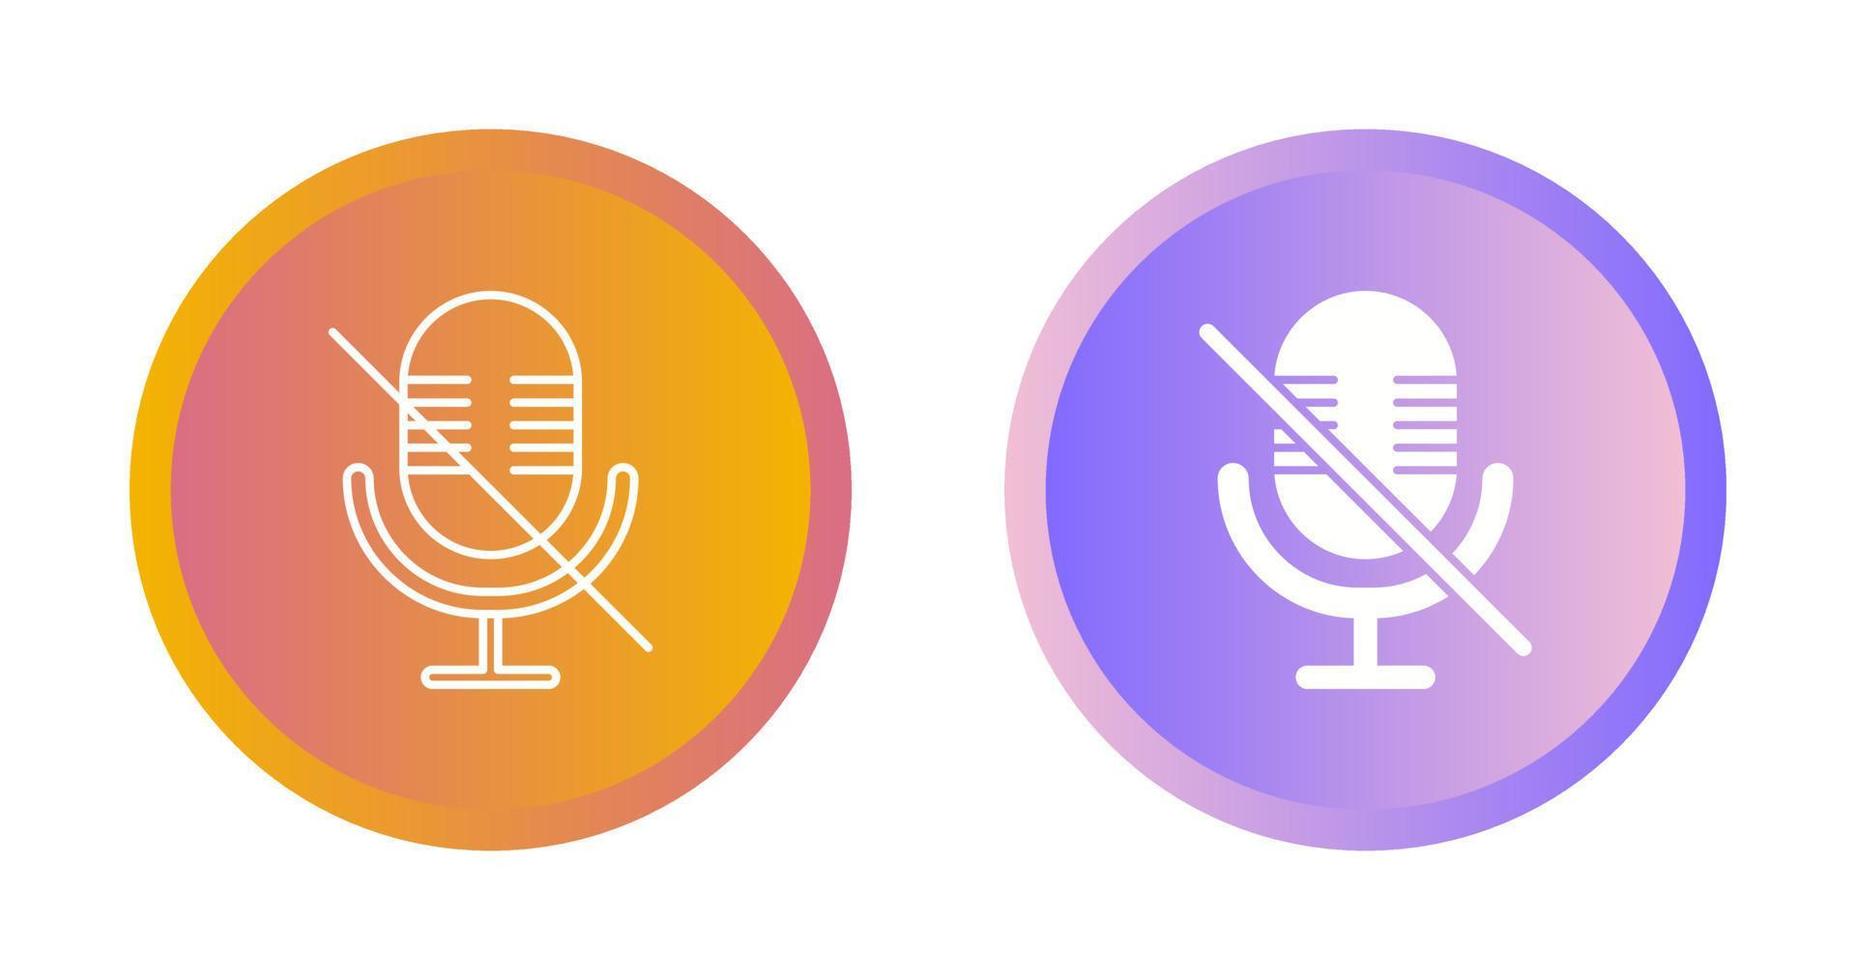 Microphone Mute Vector Icon